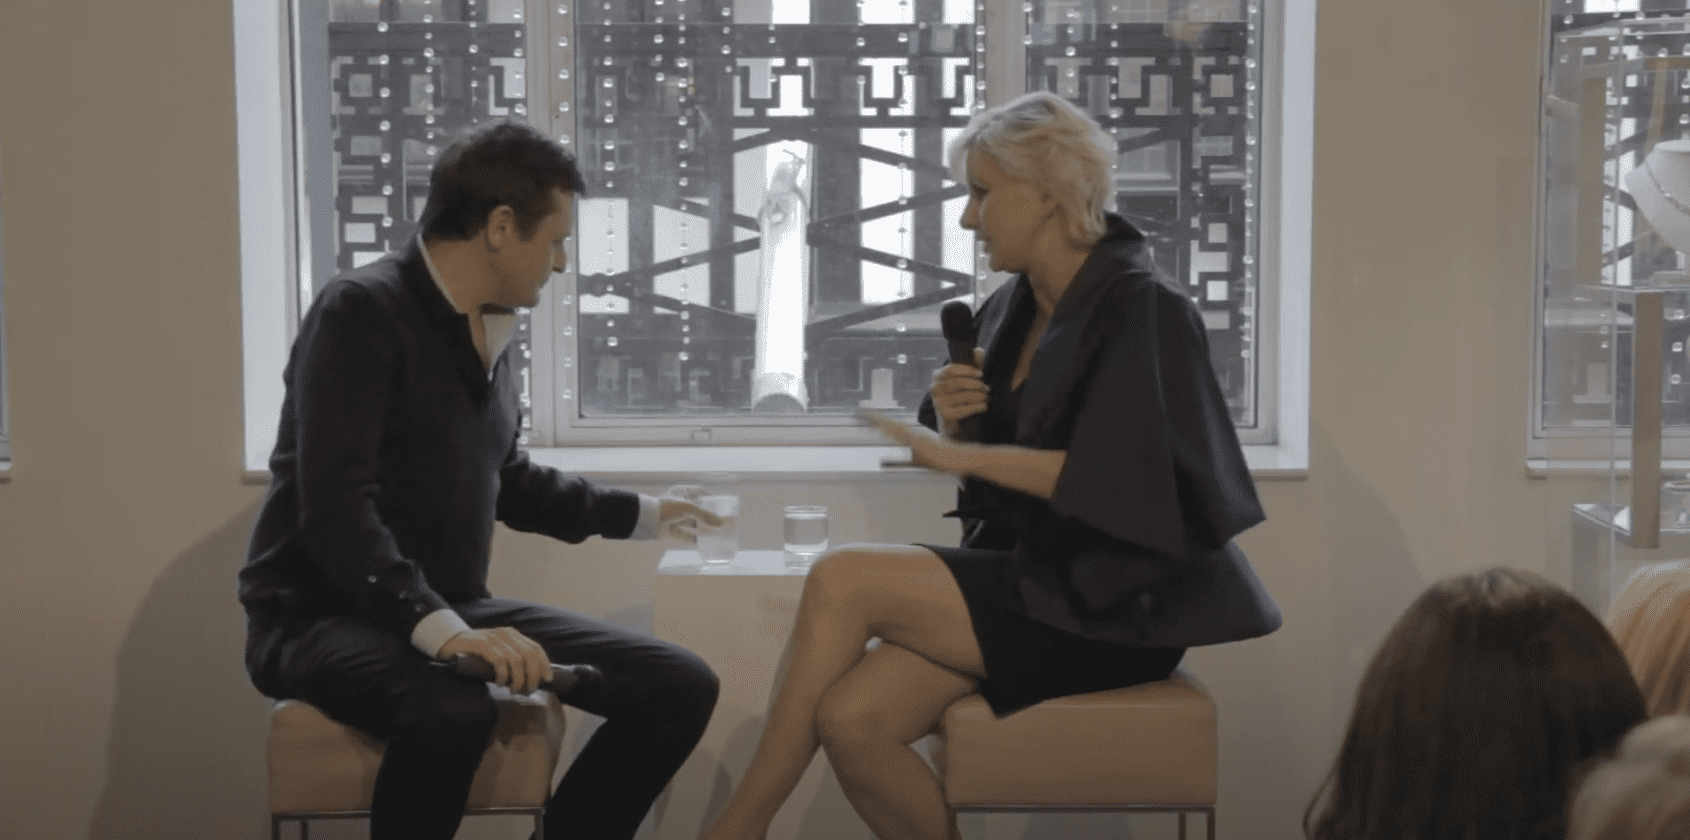 Fashion Expert Frances Card interviews Tom Chapman, Founder & CEO of Matches